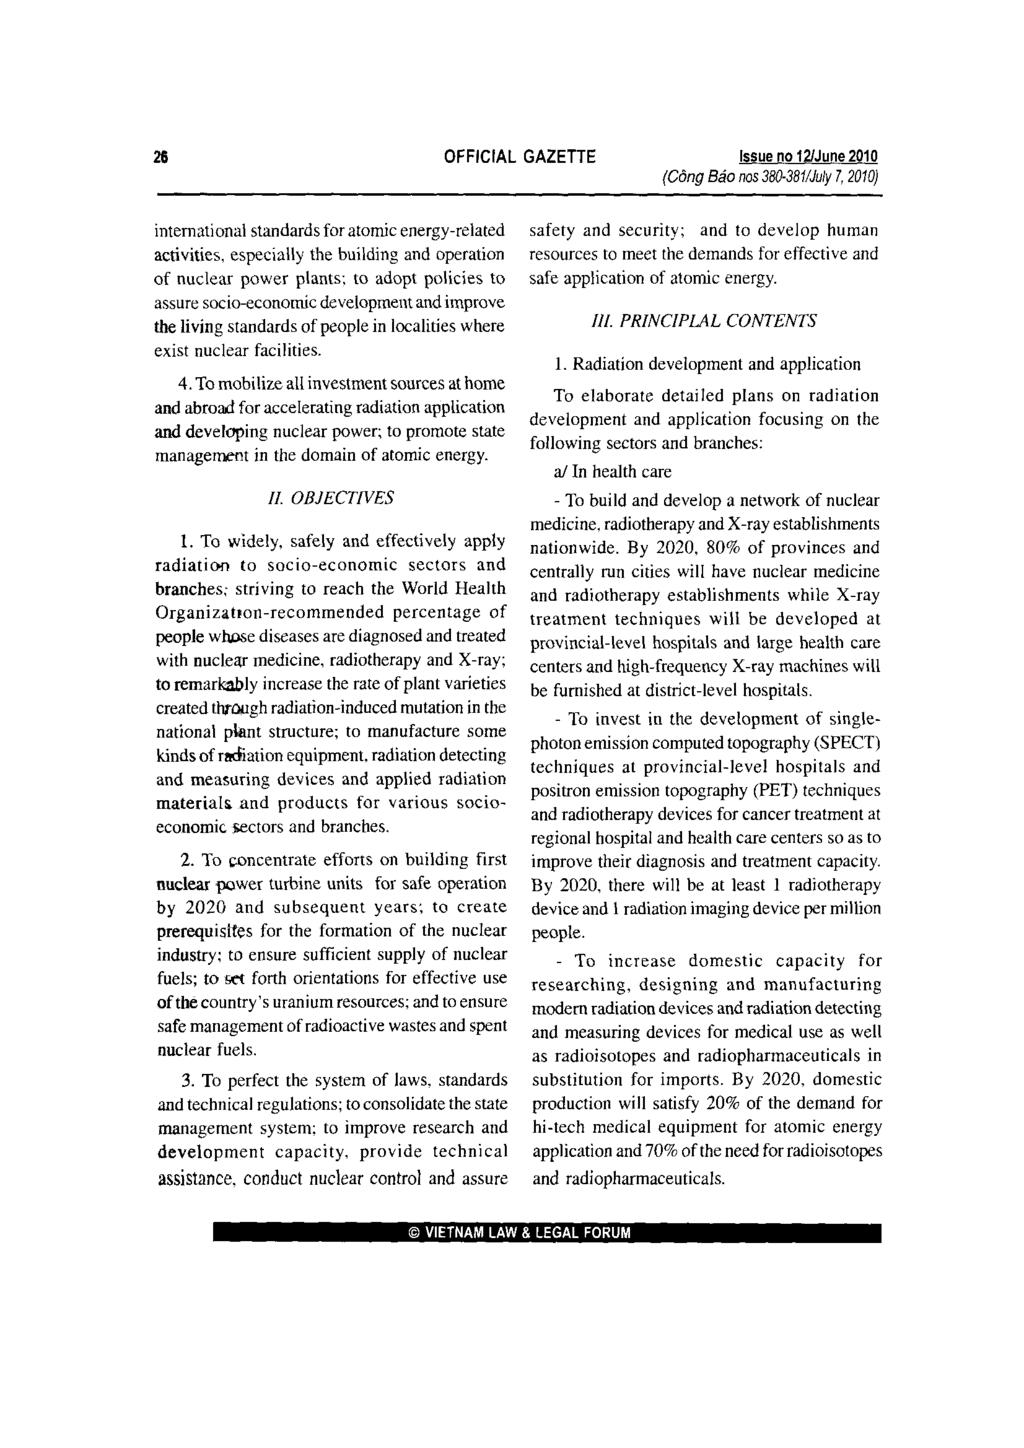 26 OFFICIAL GAZETTE Issue no12/june 2010 (Gong Bao nos 380-381/July 7, 2010) international standards for atomic energy-related activities, especially the building and operation of nuclear power